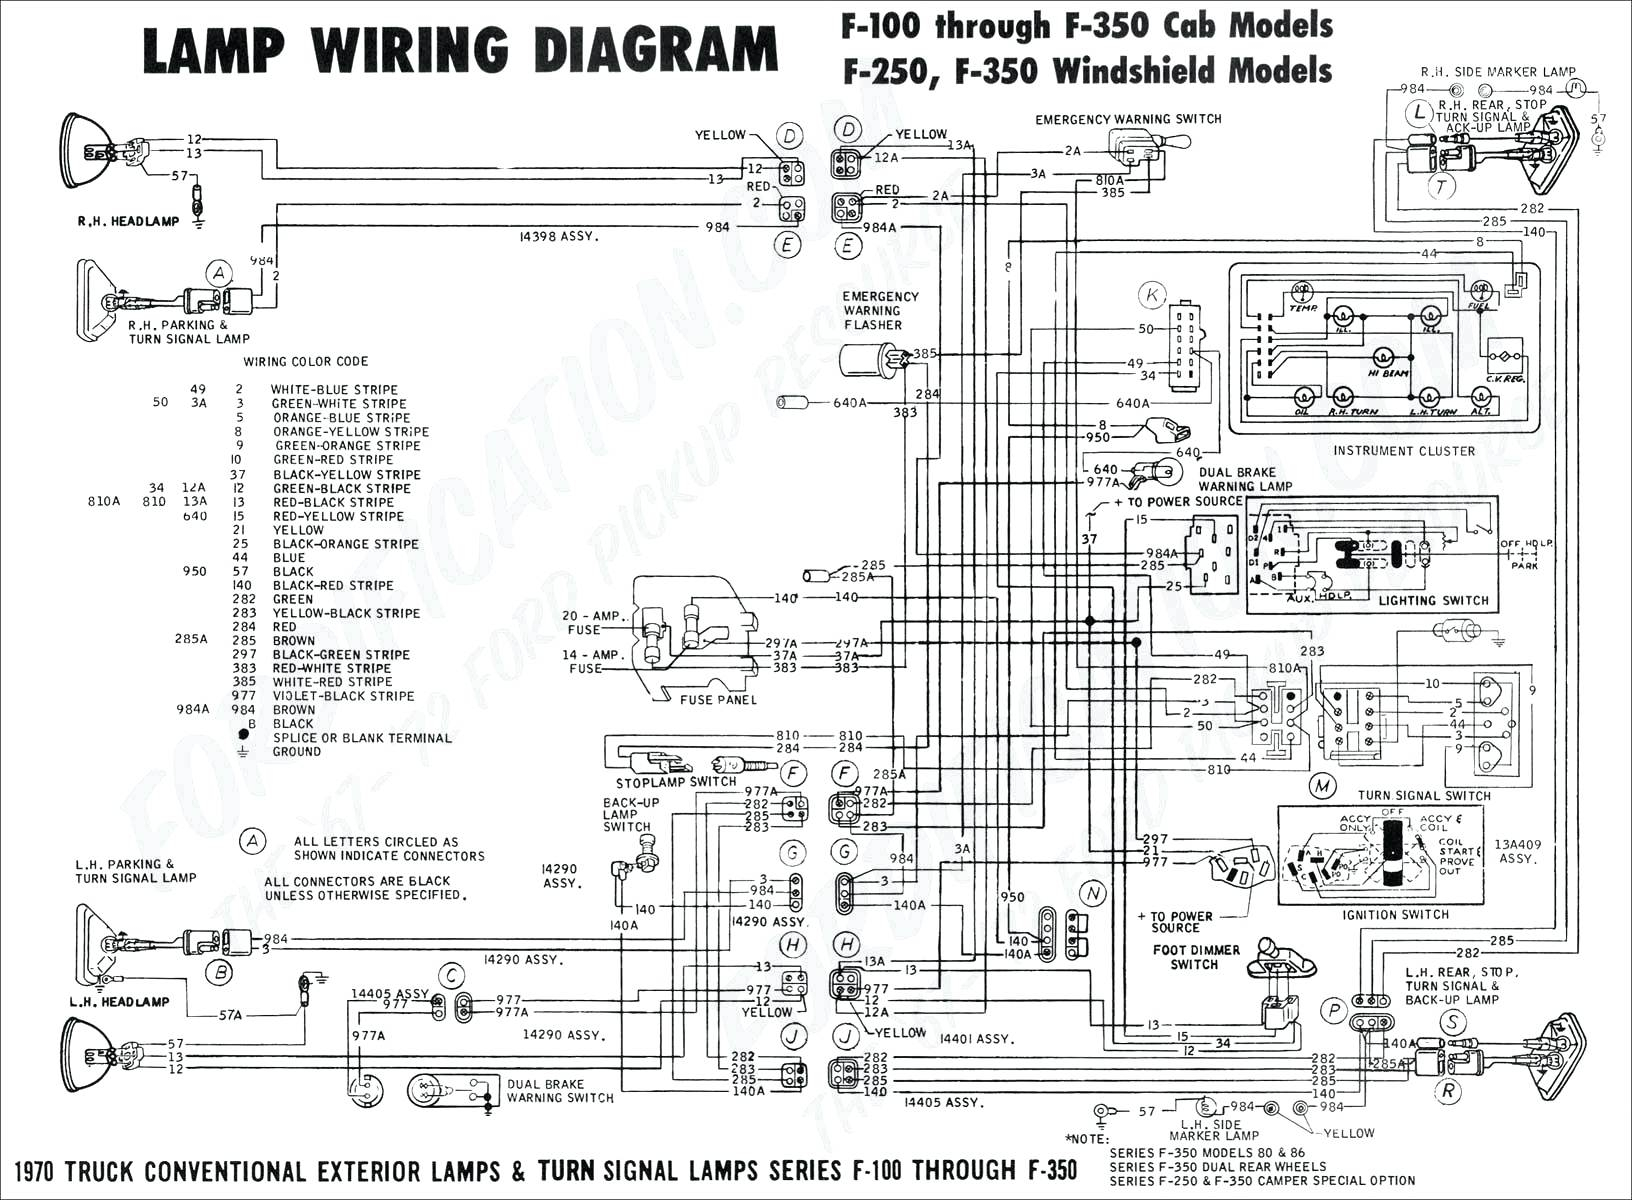 girard products wiring diagram